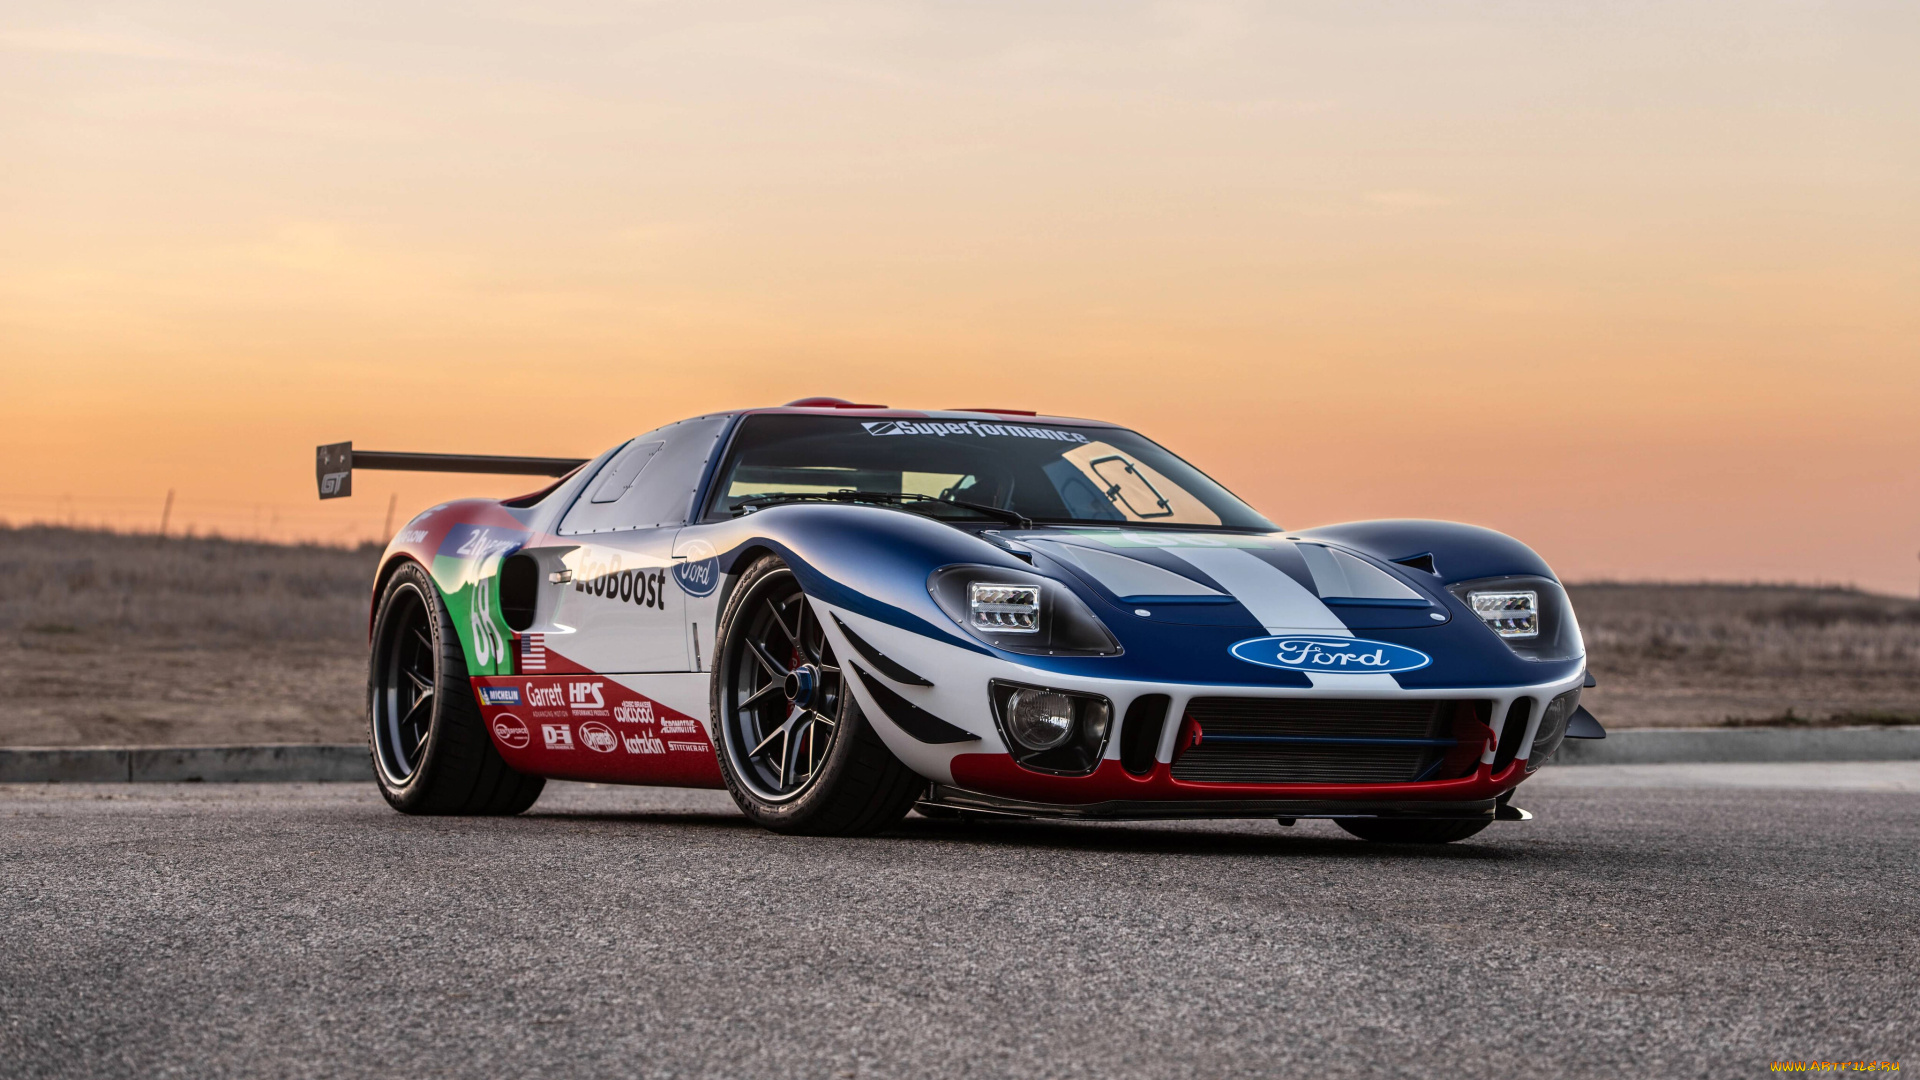 2019, superformance, future, ford, gt40, автомобили, ford, купе, форд, gt40, superformance, future, 2019